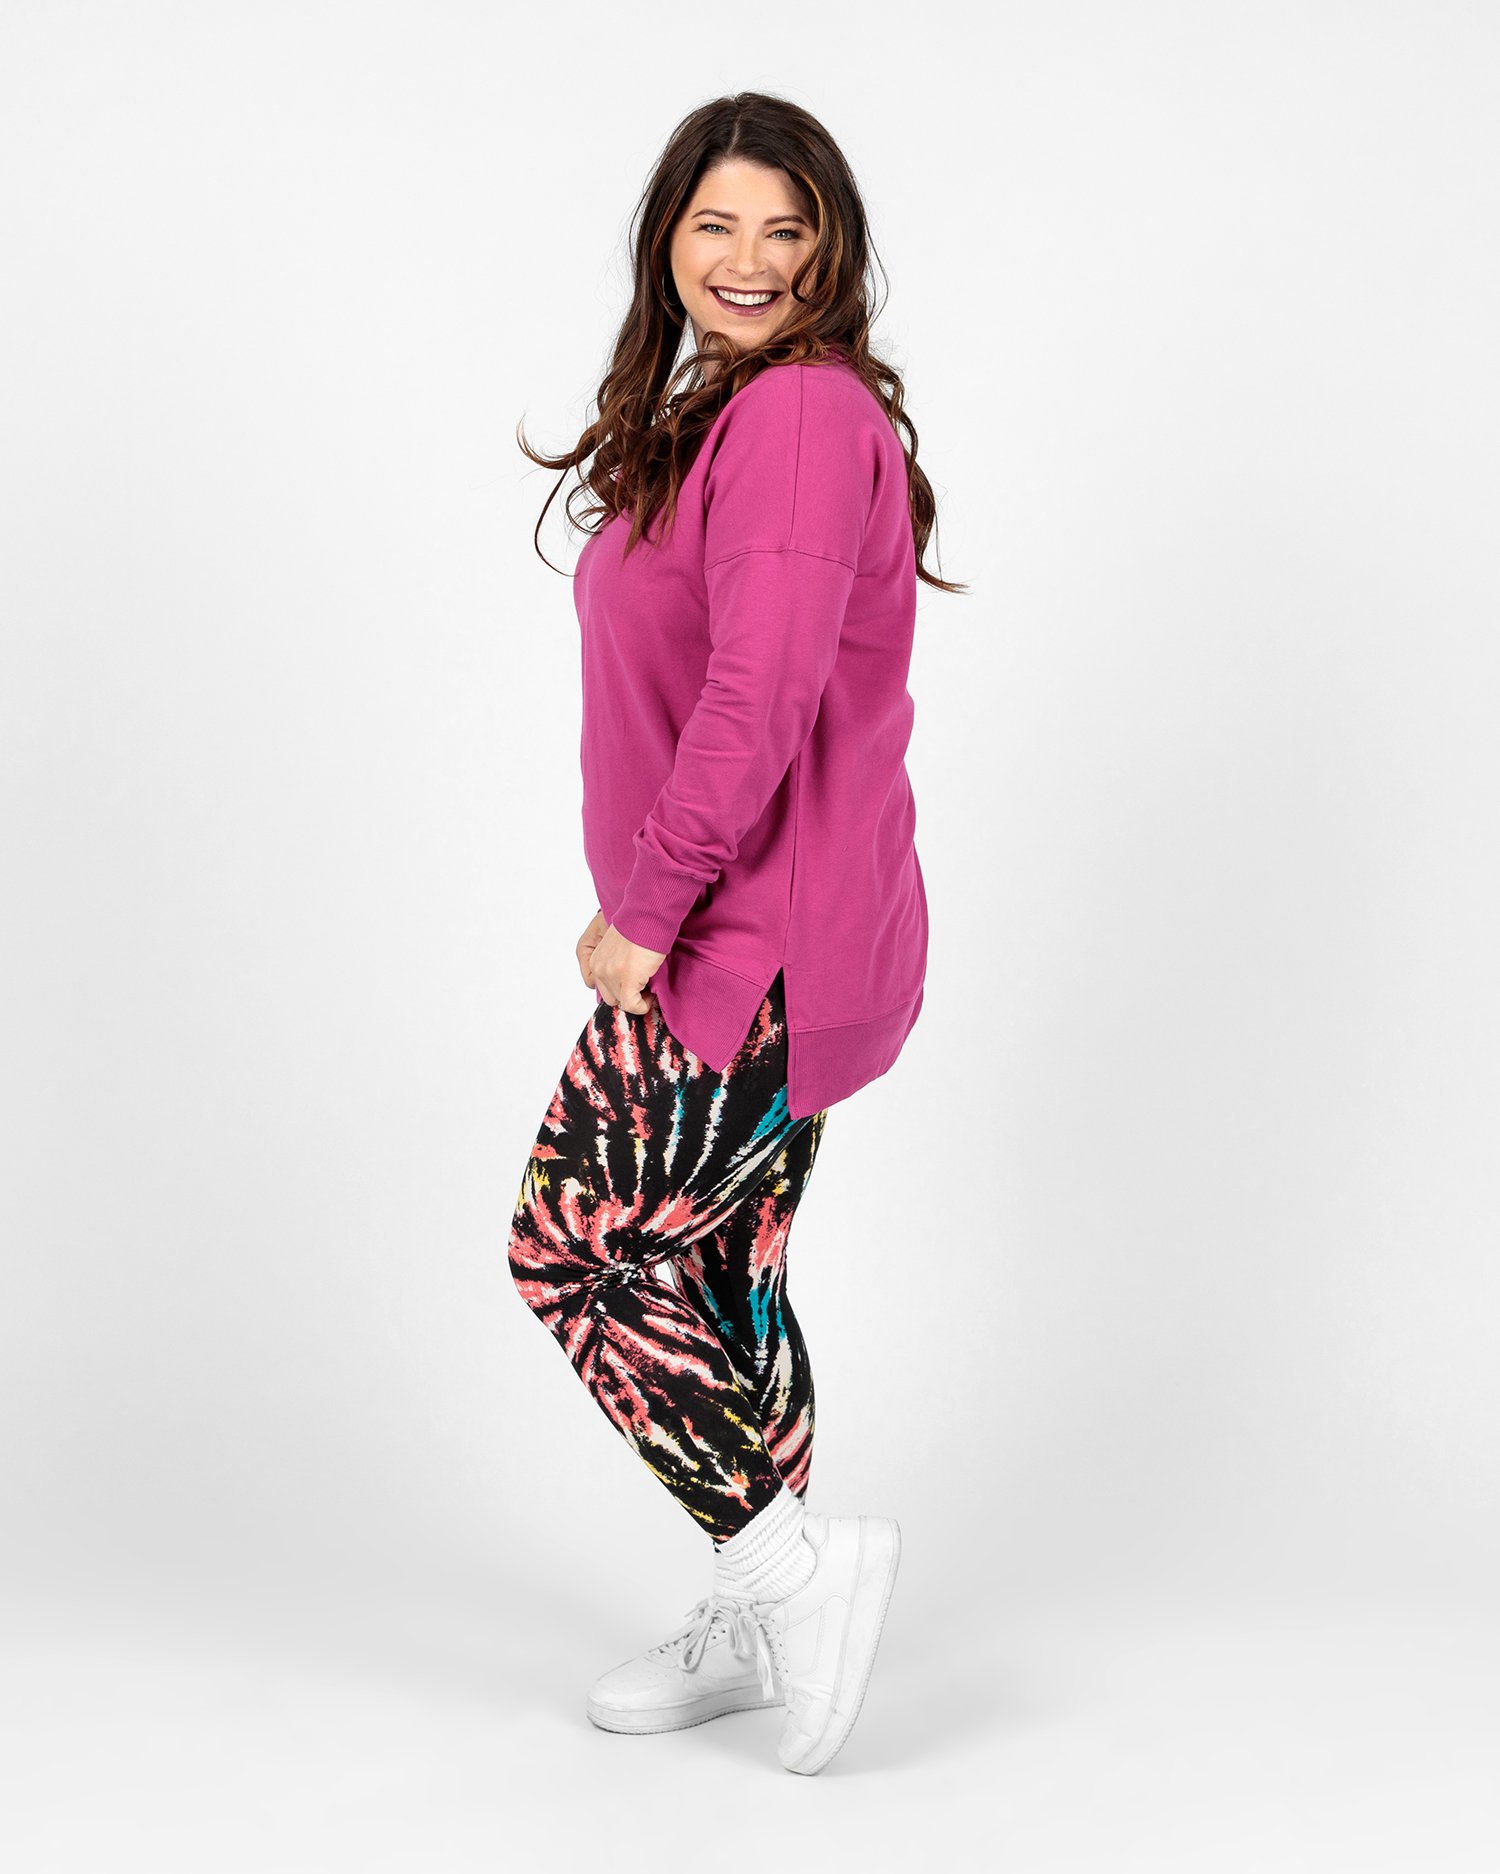 Women's Leggings Bright Multi Colored Print By New Mix Size :One Size NWT